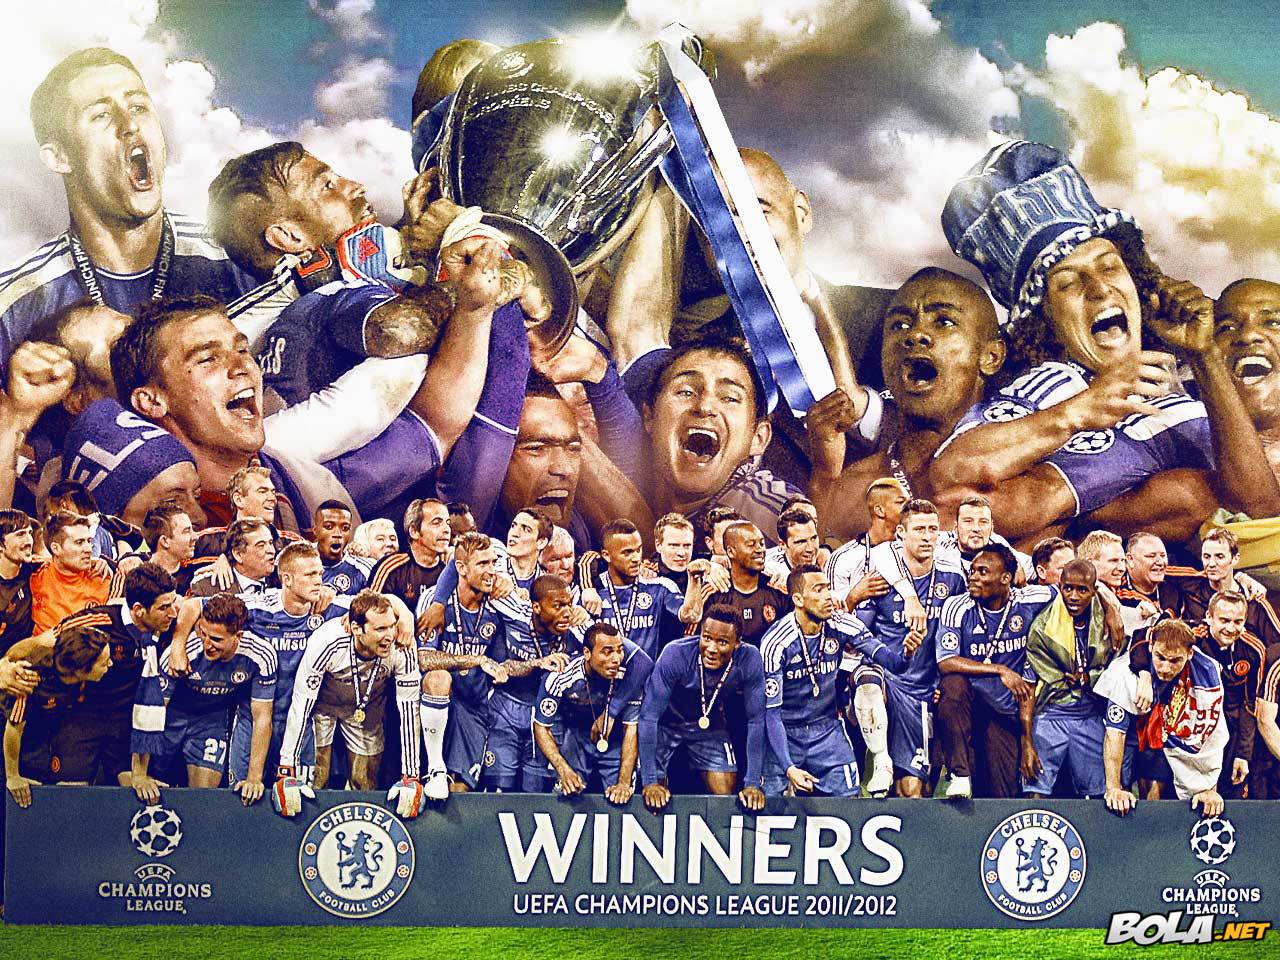 Chelsea are the Champions of Europe!!!